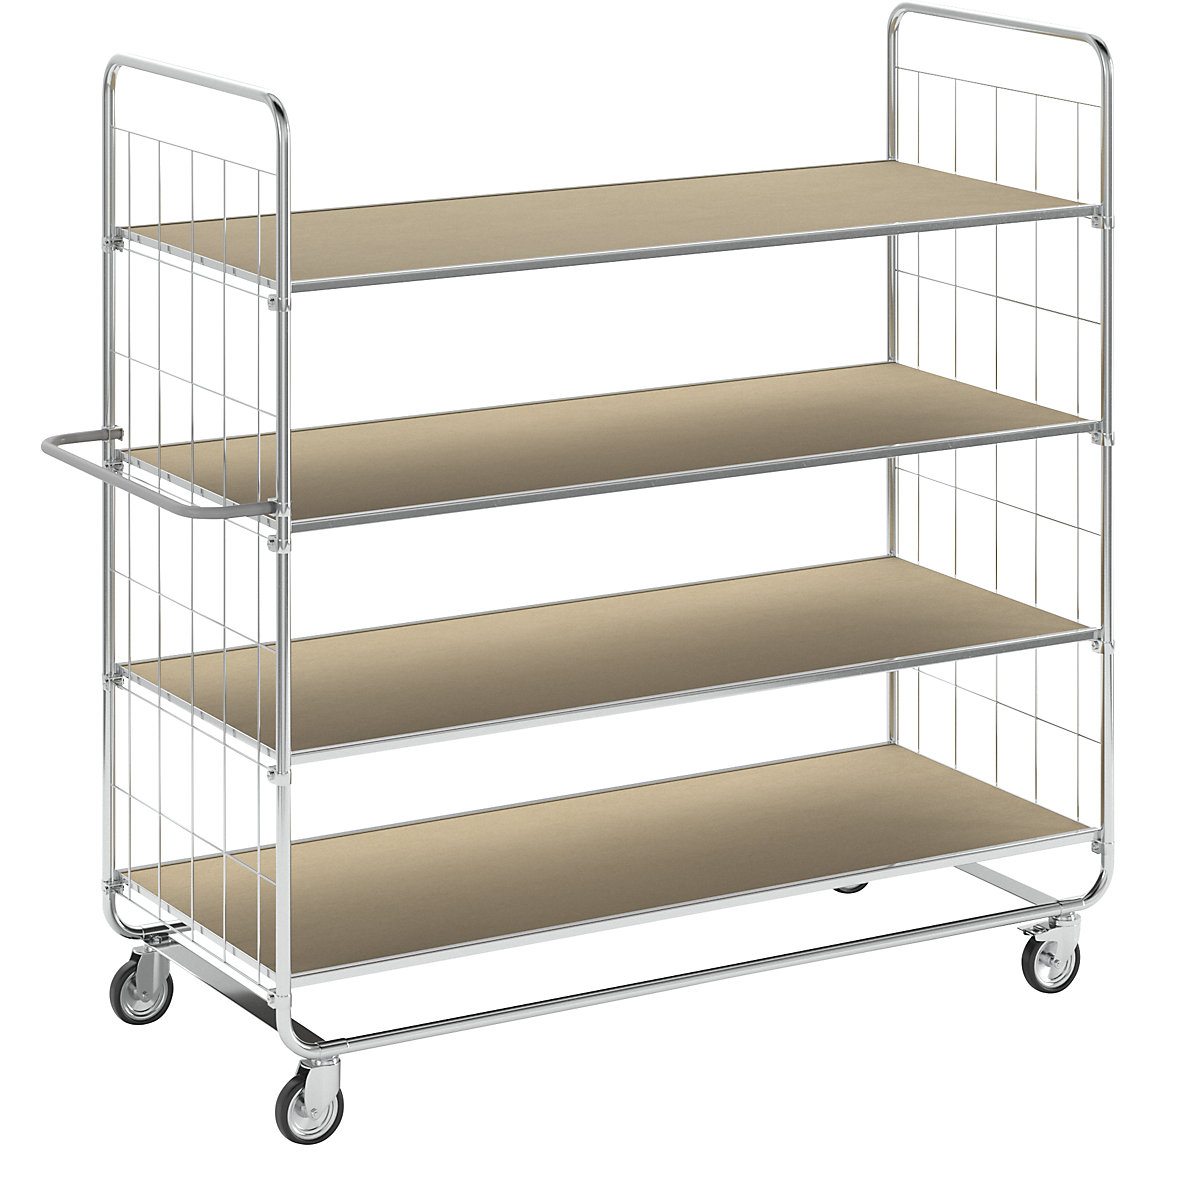 ESD shelf truck, with 4 shelves – Kongamek, 4 castors, 2 with stops, LxWxH 1195 x 470 x 1120 mm, 2+ items-19